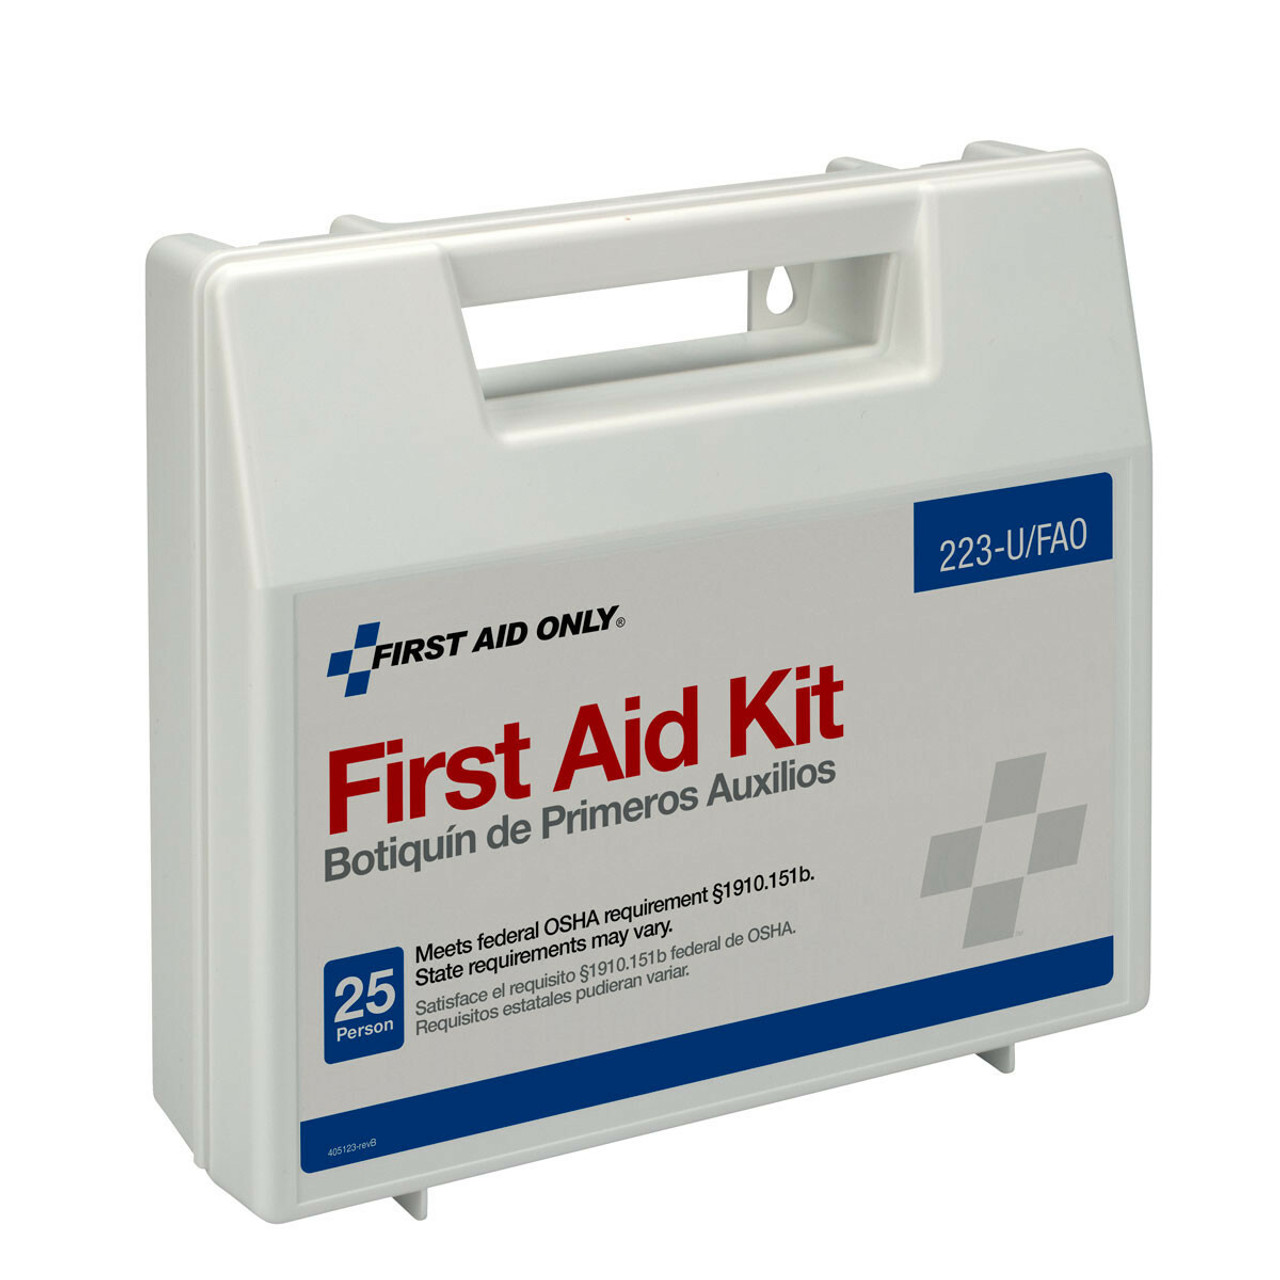 223-U/FAO Wall-mount 25 Person First Aid Kit in Plastic Carry Case